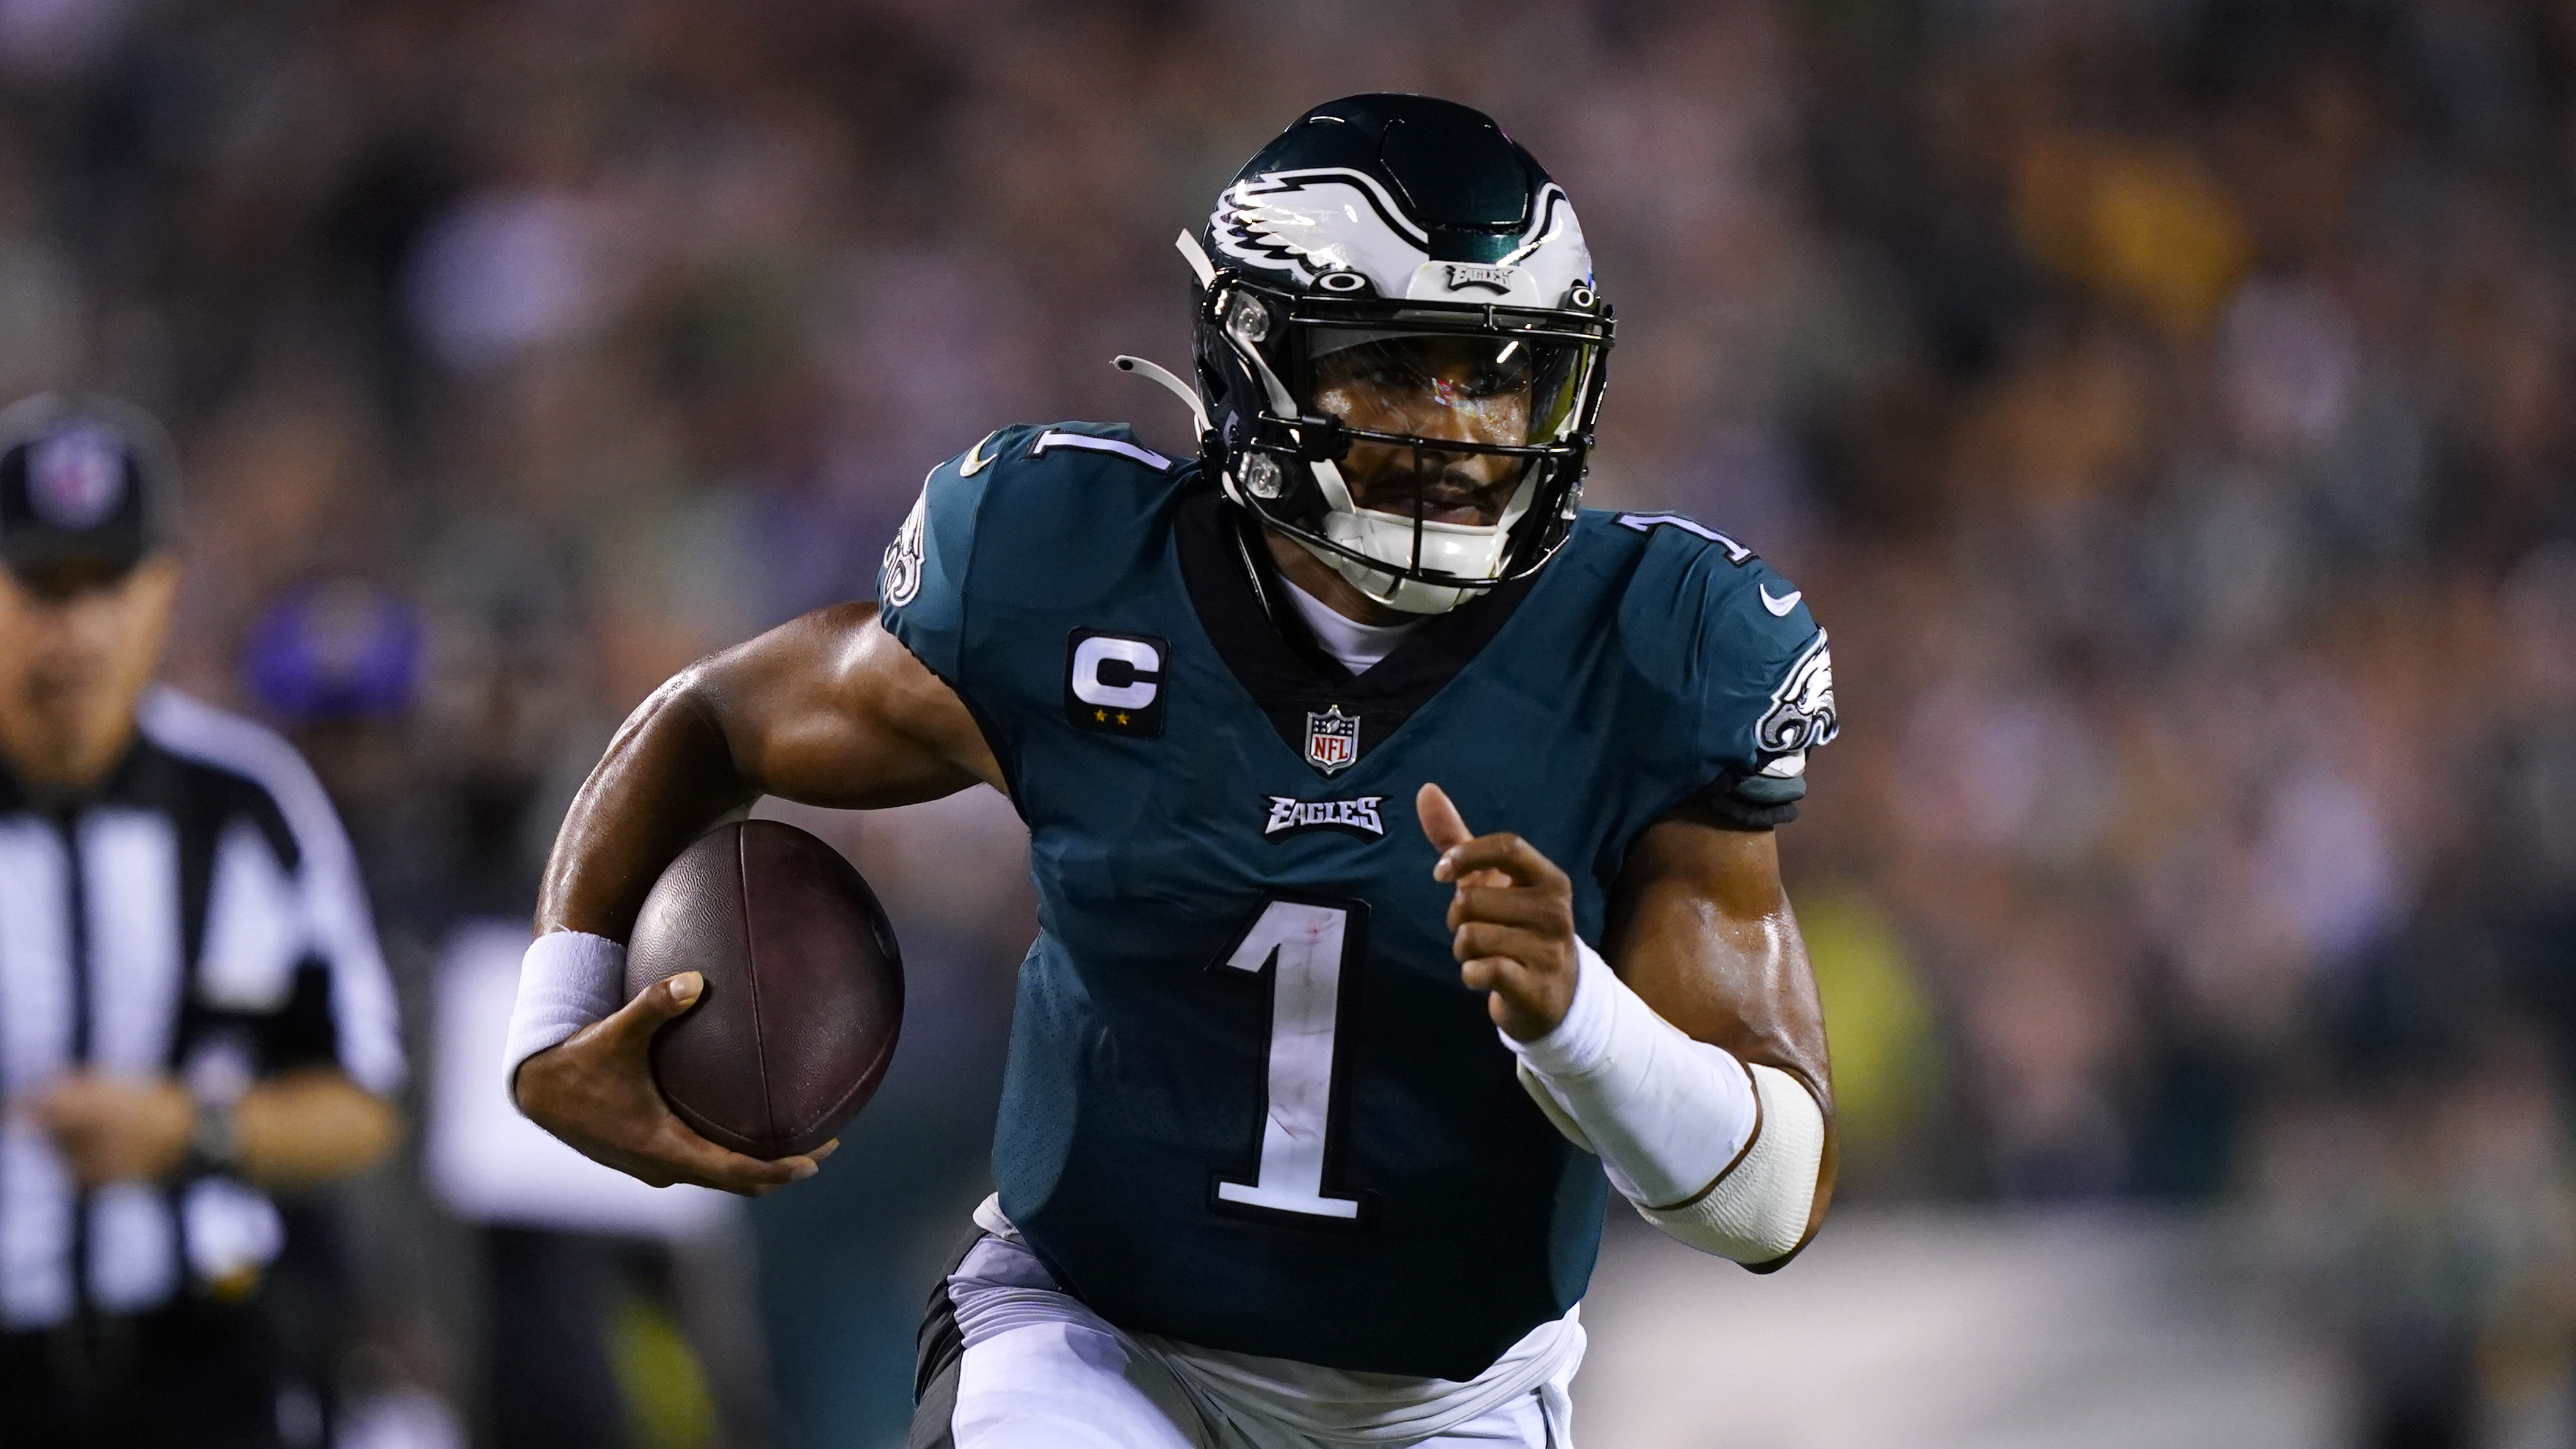 Philadelphia Eagles quarterback Jalen Hurts (1) runs up field during the first half of an NFL football game against the Minnesota Vikings on Monday